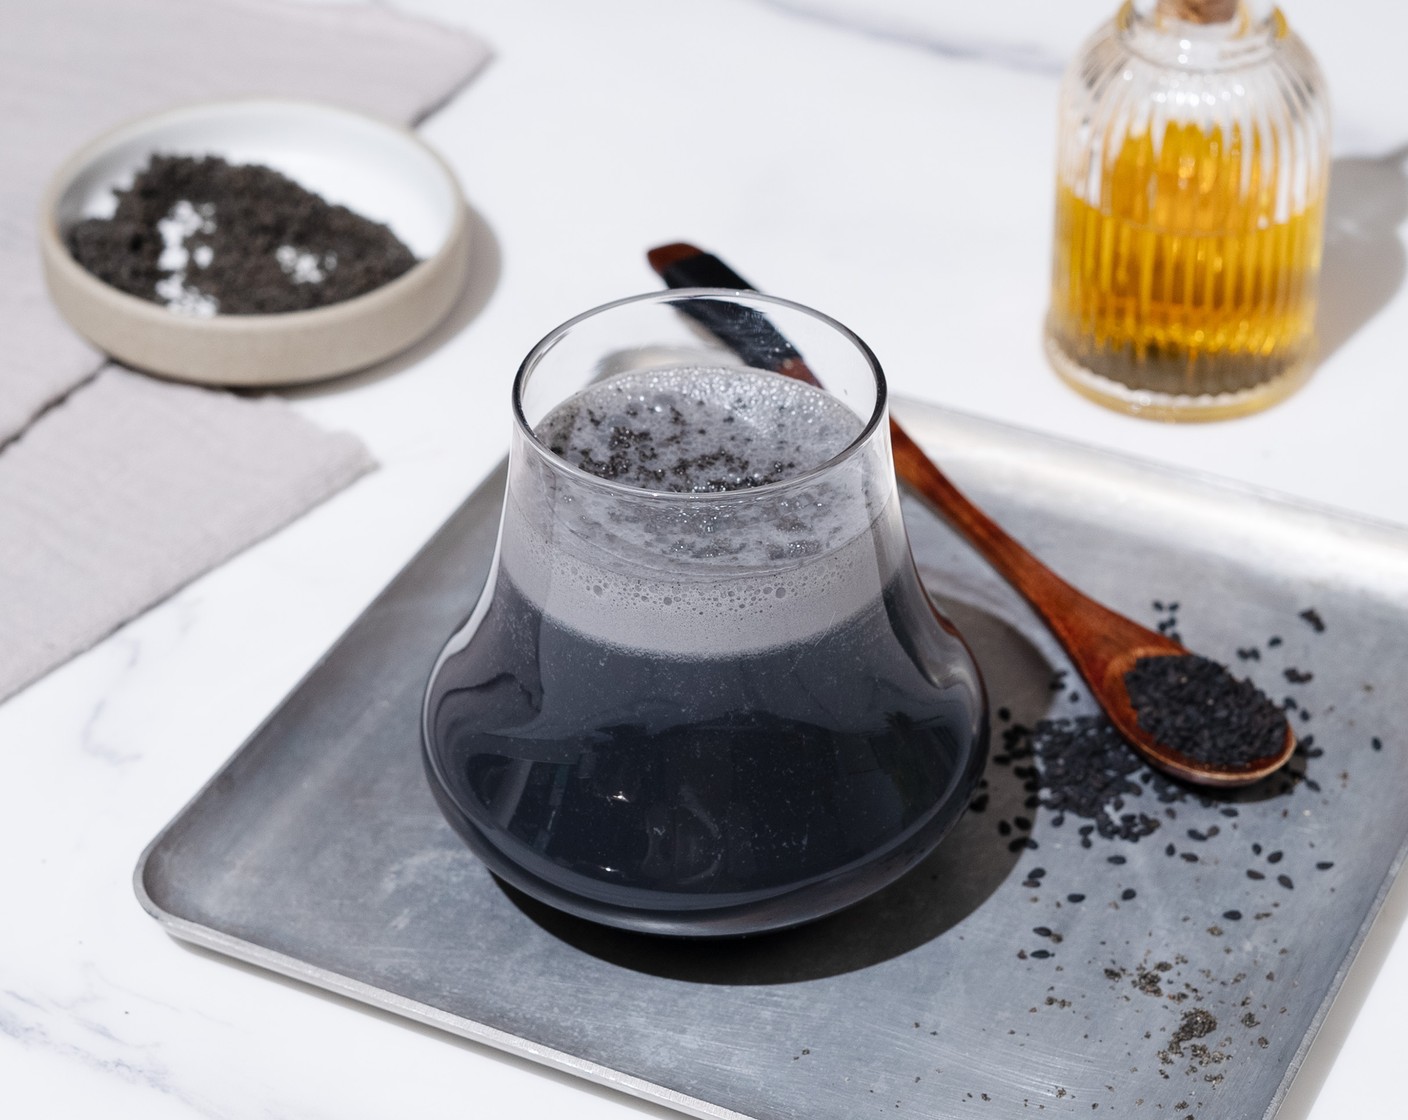 step 2 Into a glass, pour the drink. Optionally garnish with Toasted Black Sesame Seeds (1 tsp) and serve.